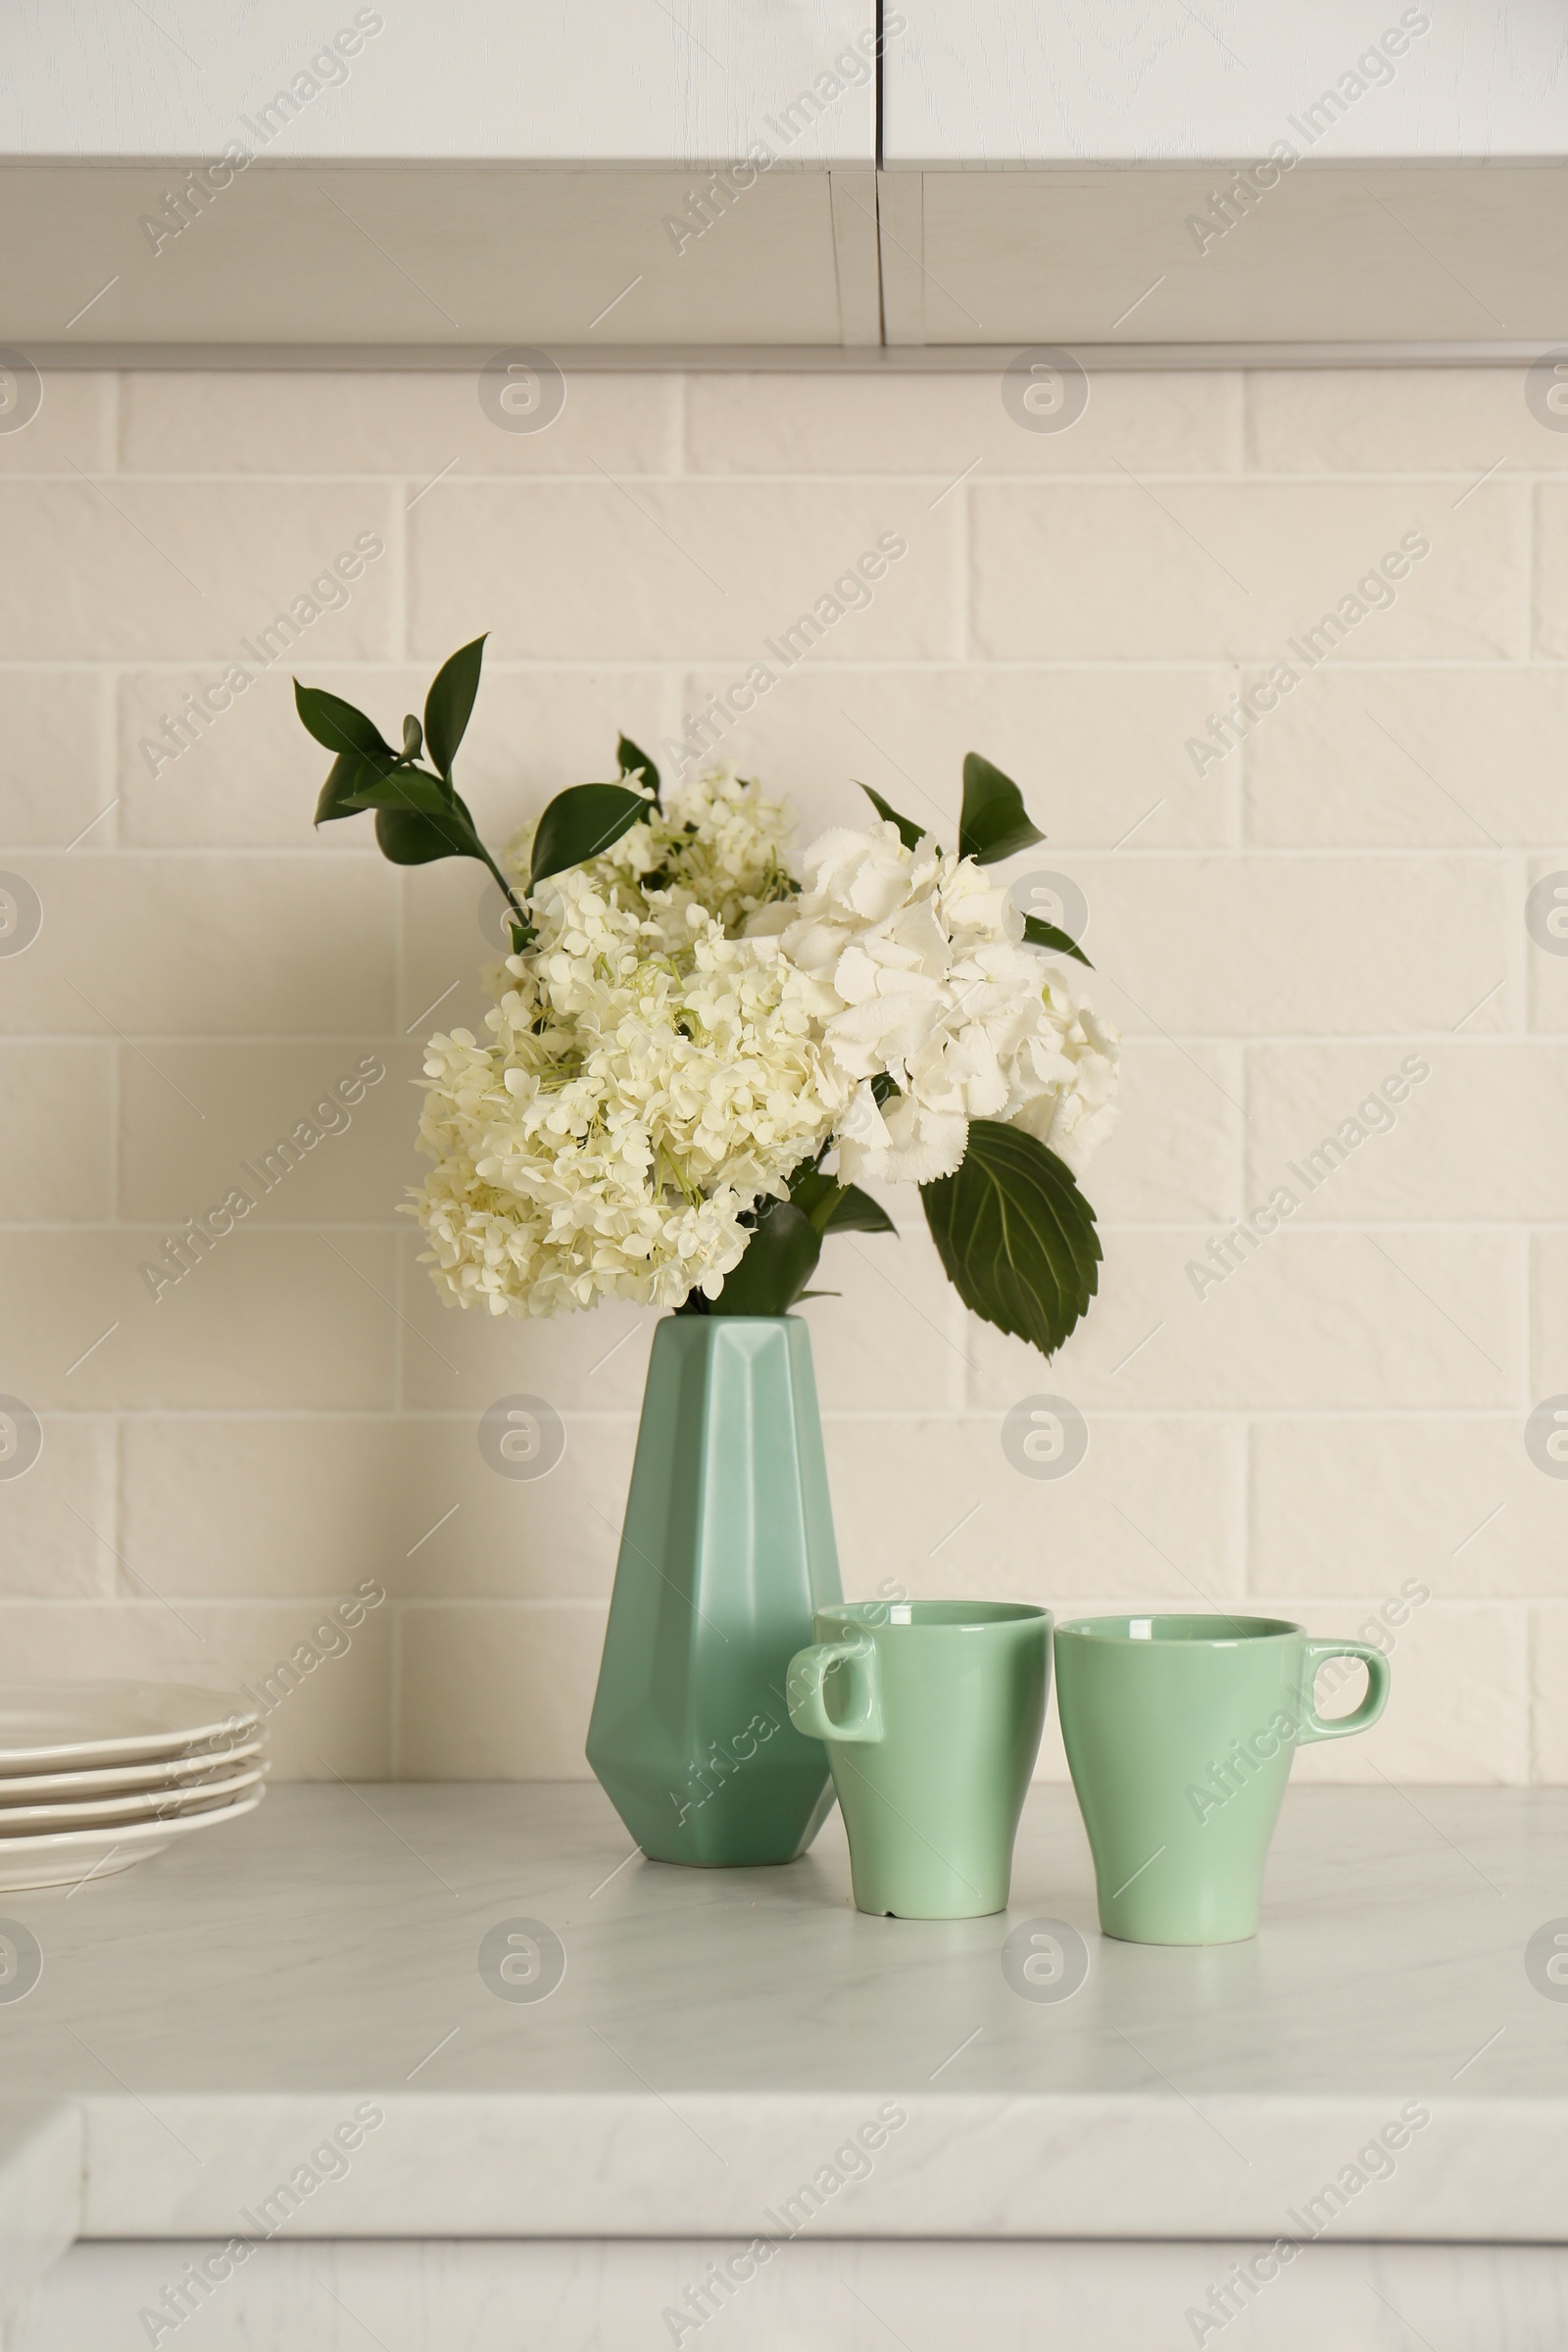 Photo of Bouquet with beautiful white hydrangea flowers and cups on light countertop